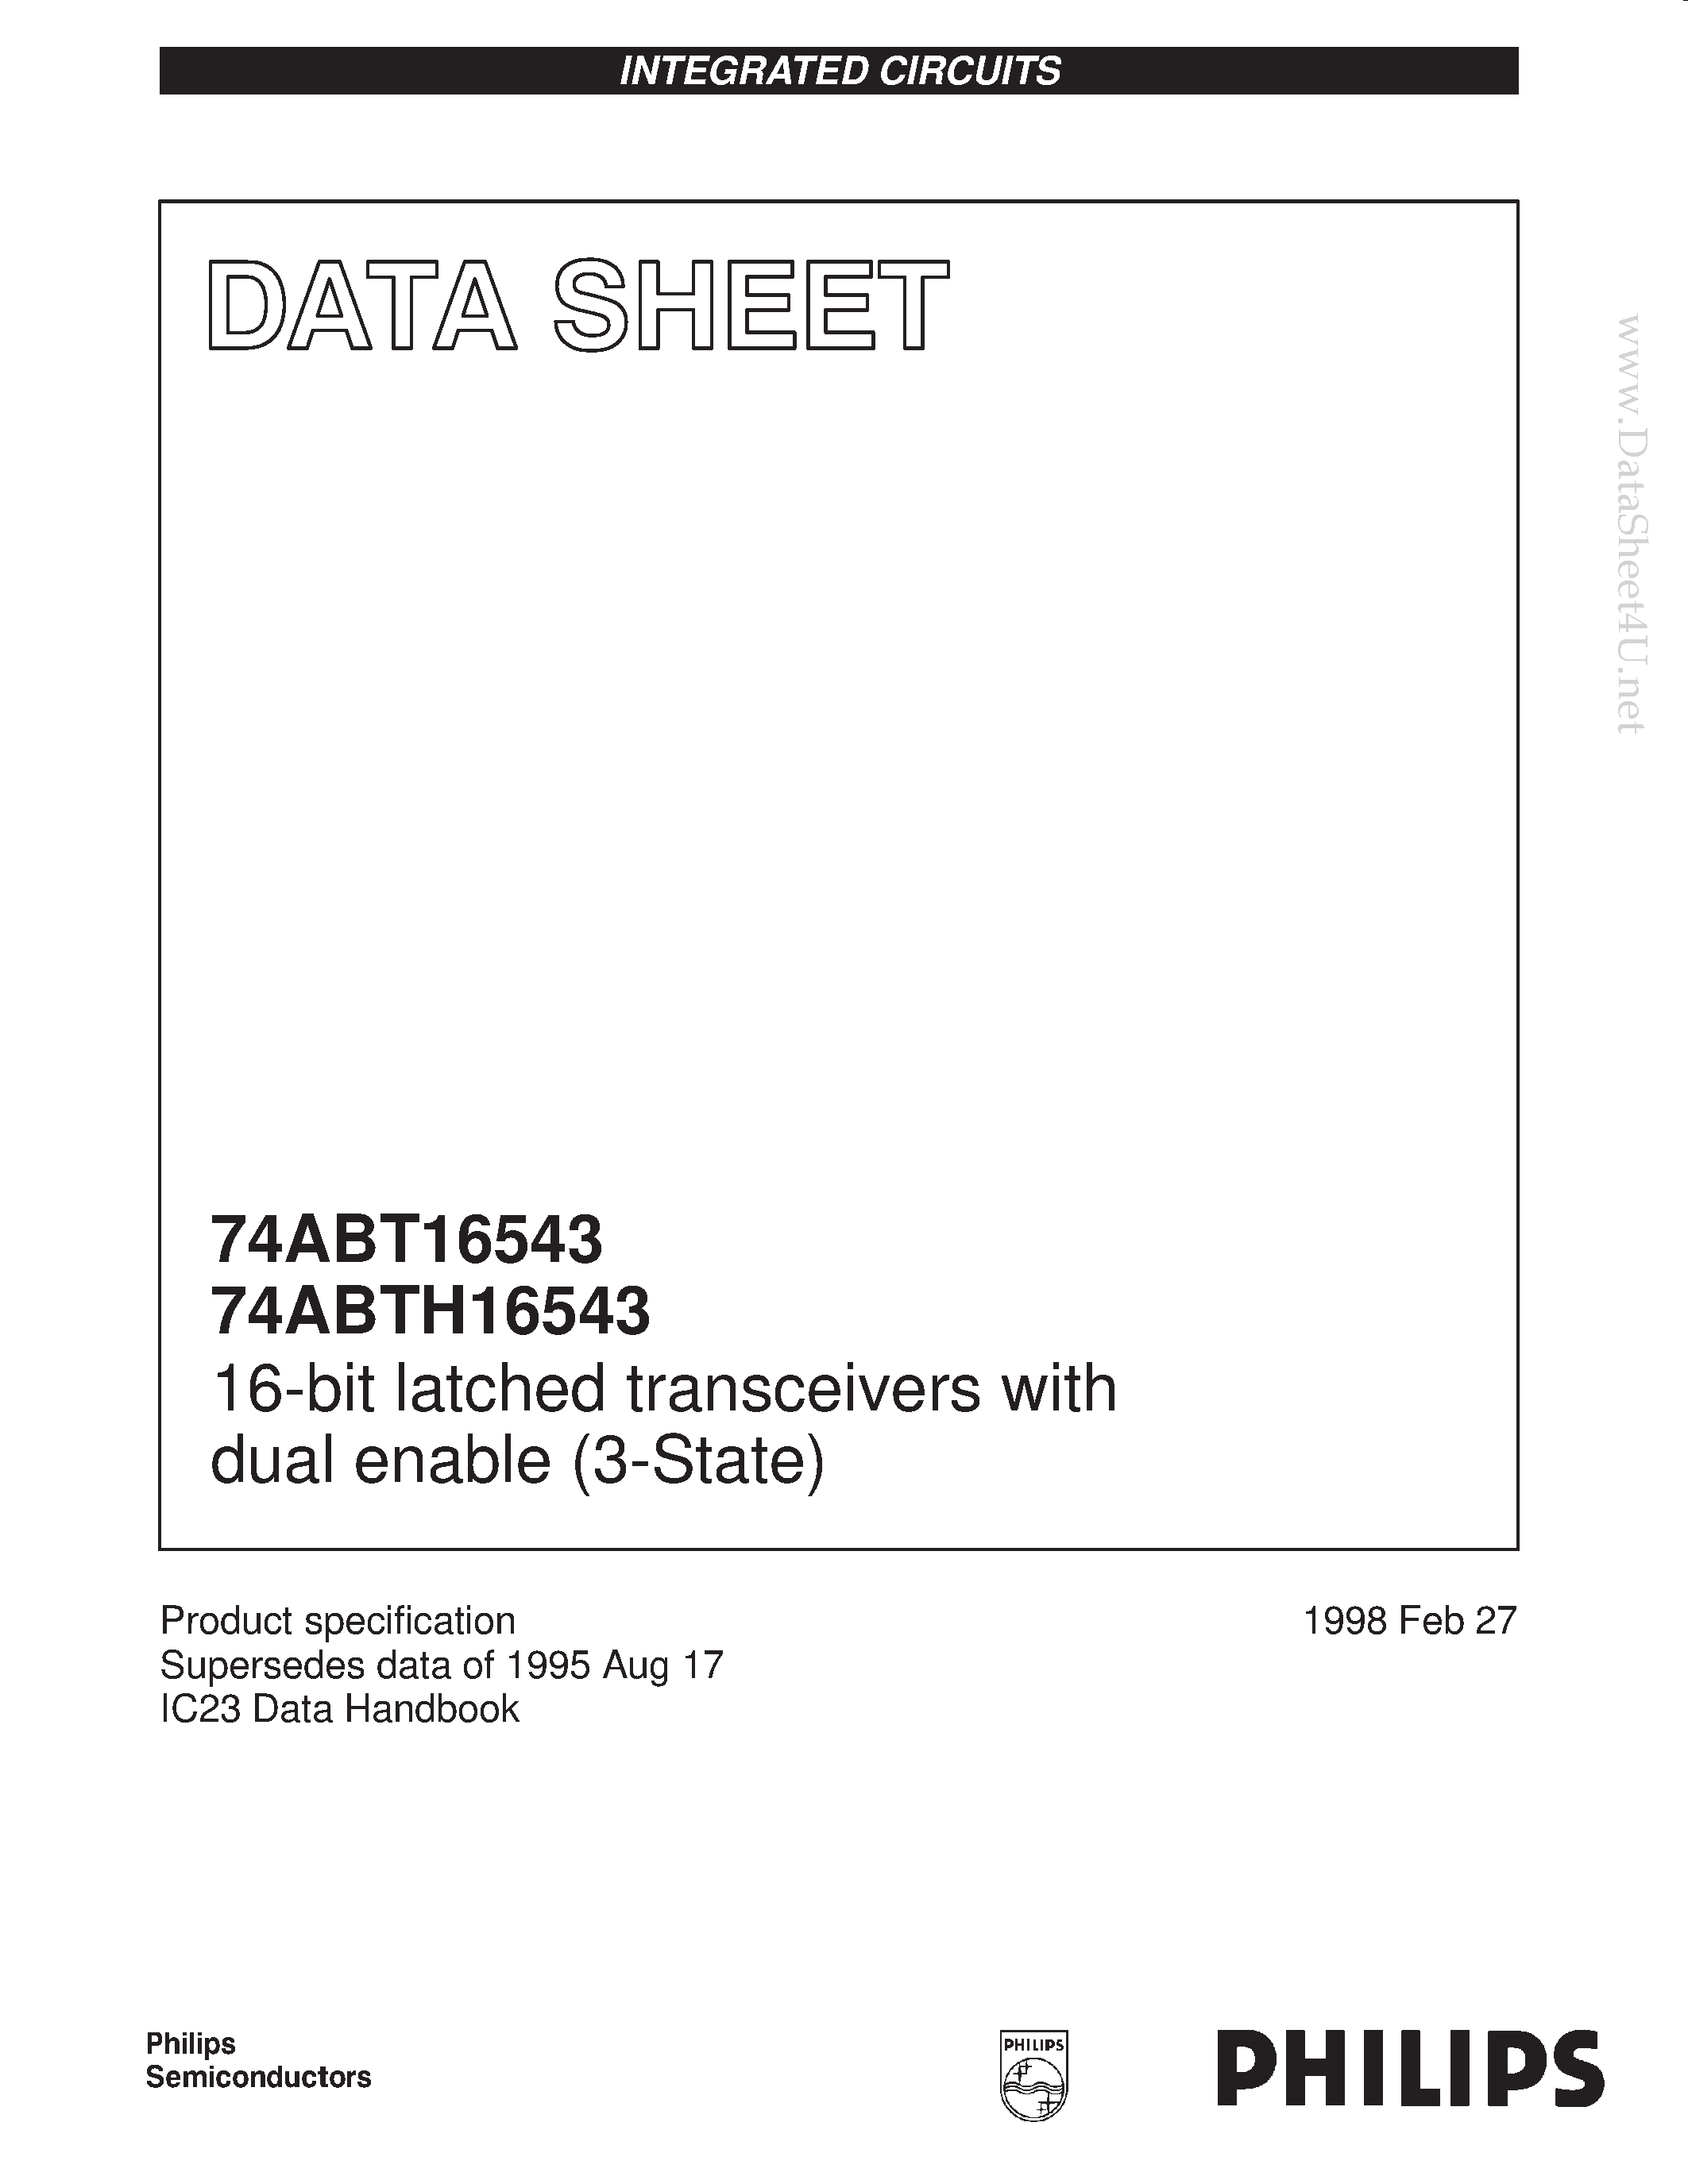 Datasheet 74ABTH16543DGG - 16-bit latched transceivers with dual enable 3-State page 1